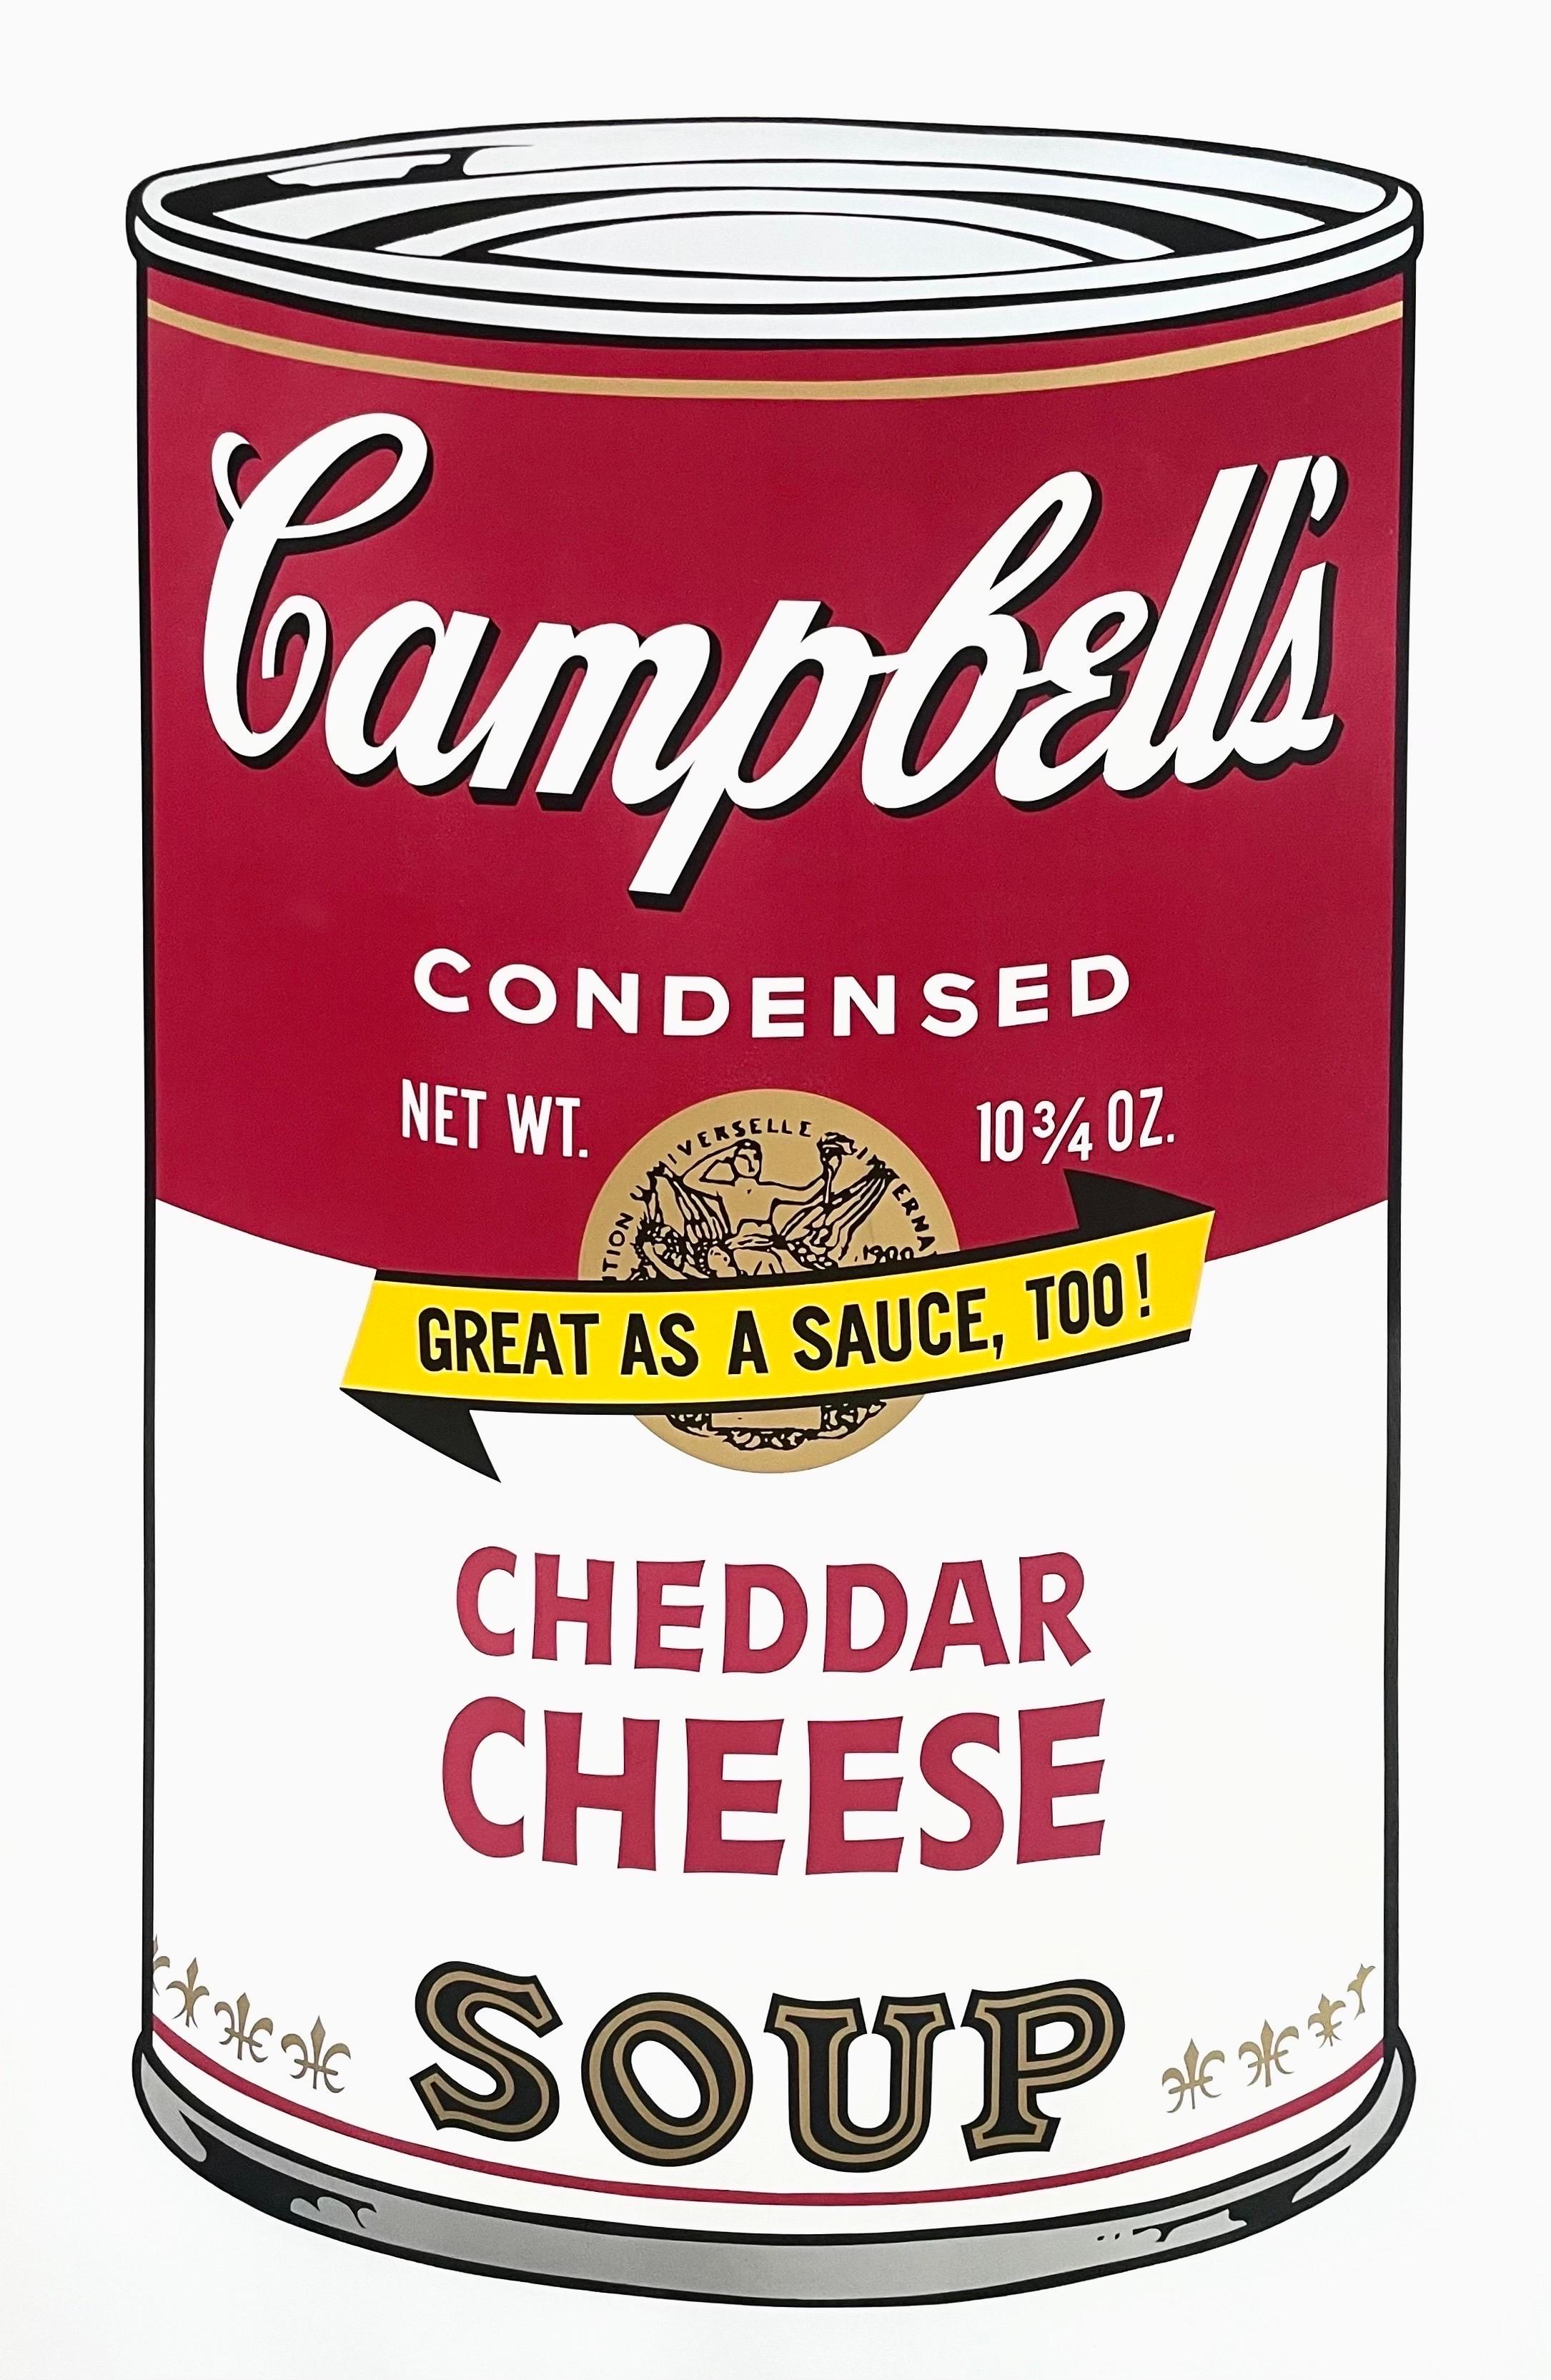 warhol campbell's soup cheddar cheese